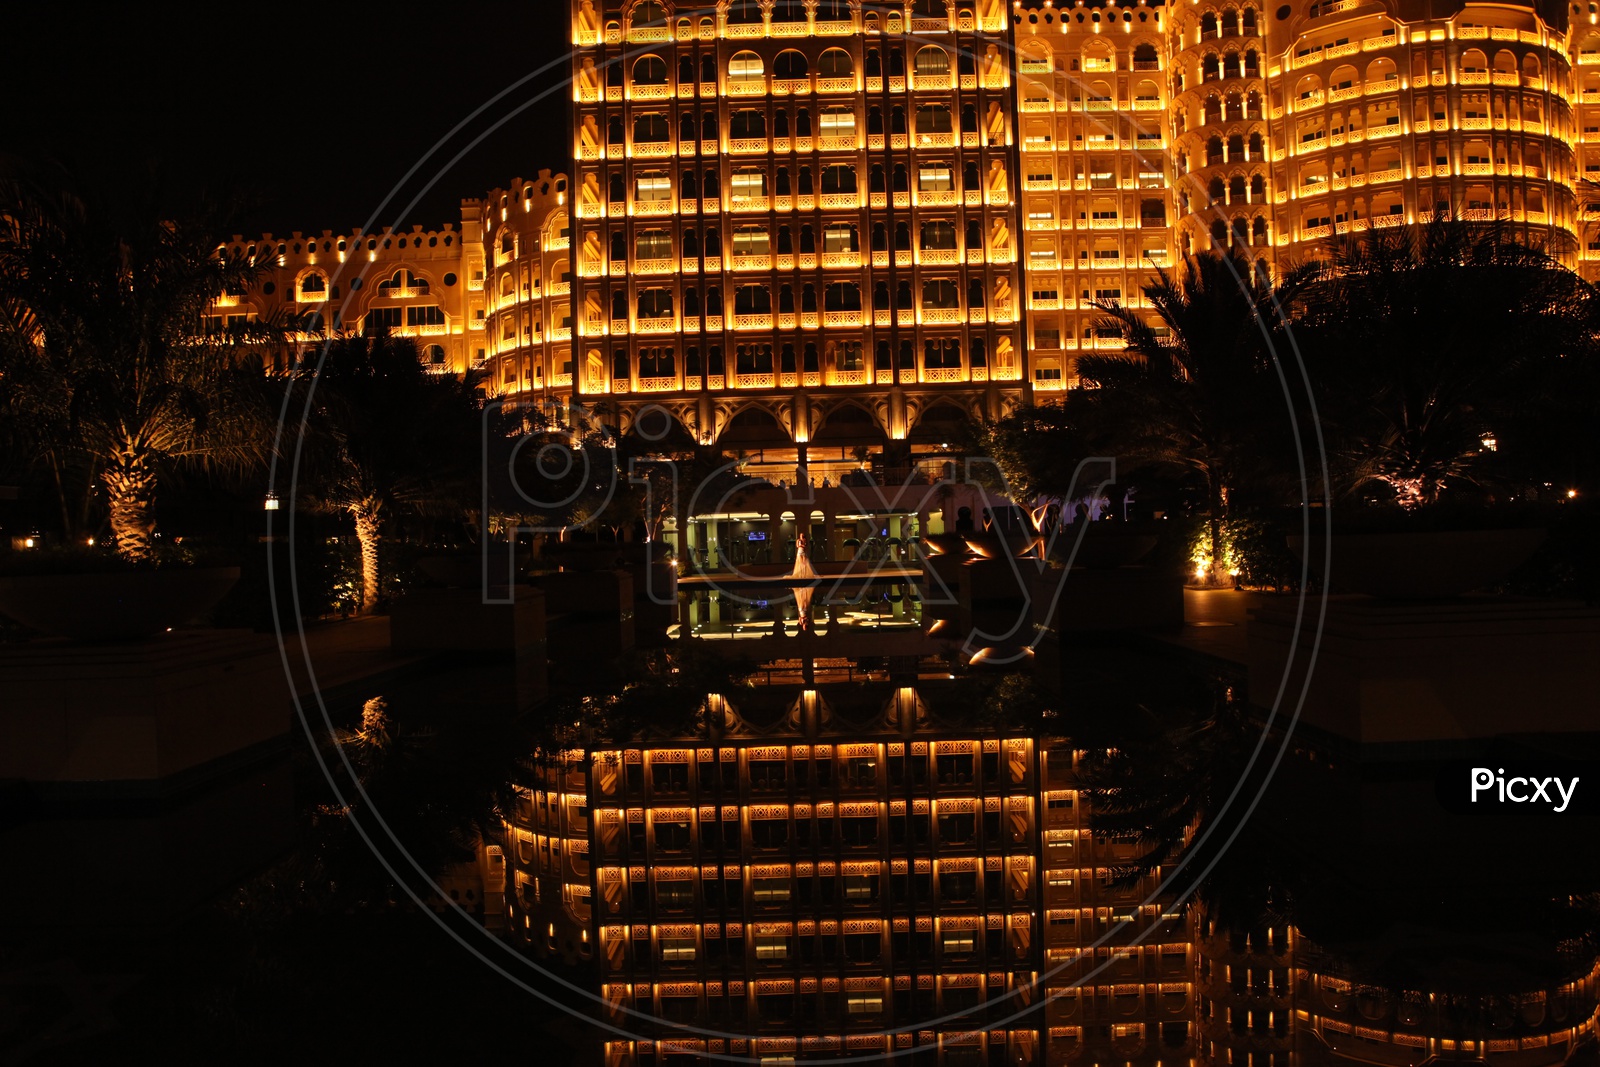 Reflection of a Building Facade On Water Surface